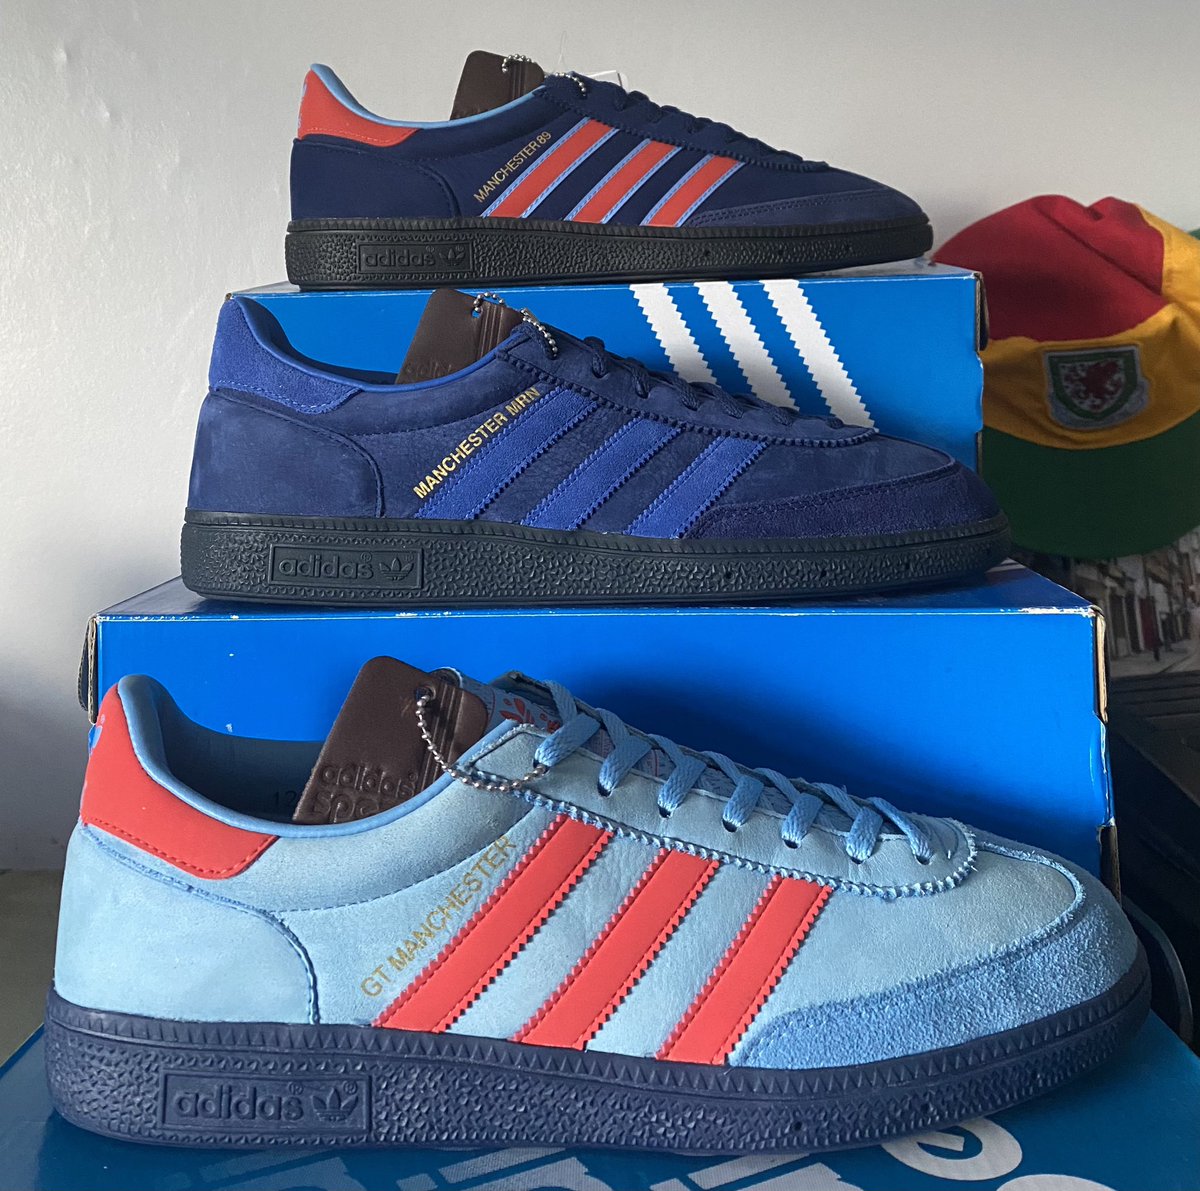 Last drop of the year, taken a couple of weeks, but bagged the 89’s in the end! #SPZL 

#Manchester89 ✅
#ManchesterMRN ✅ 
#ManchesterGT ✅